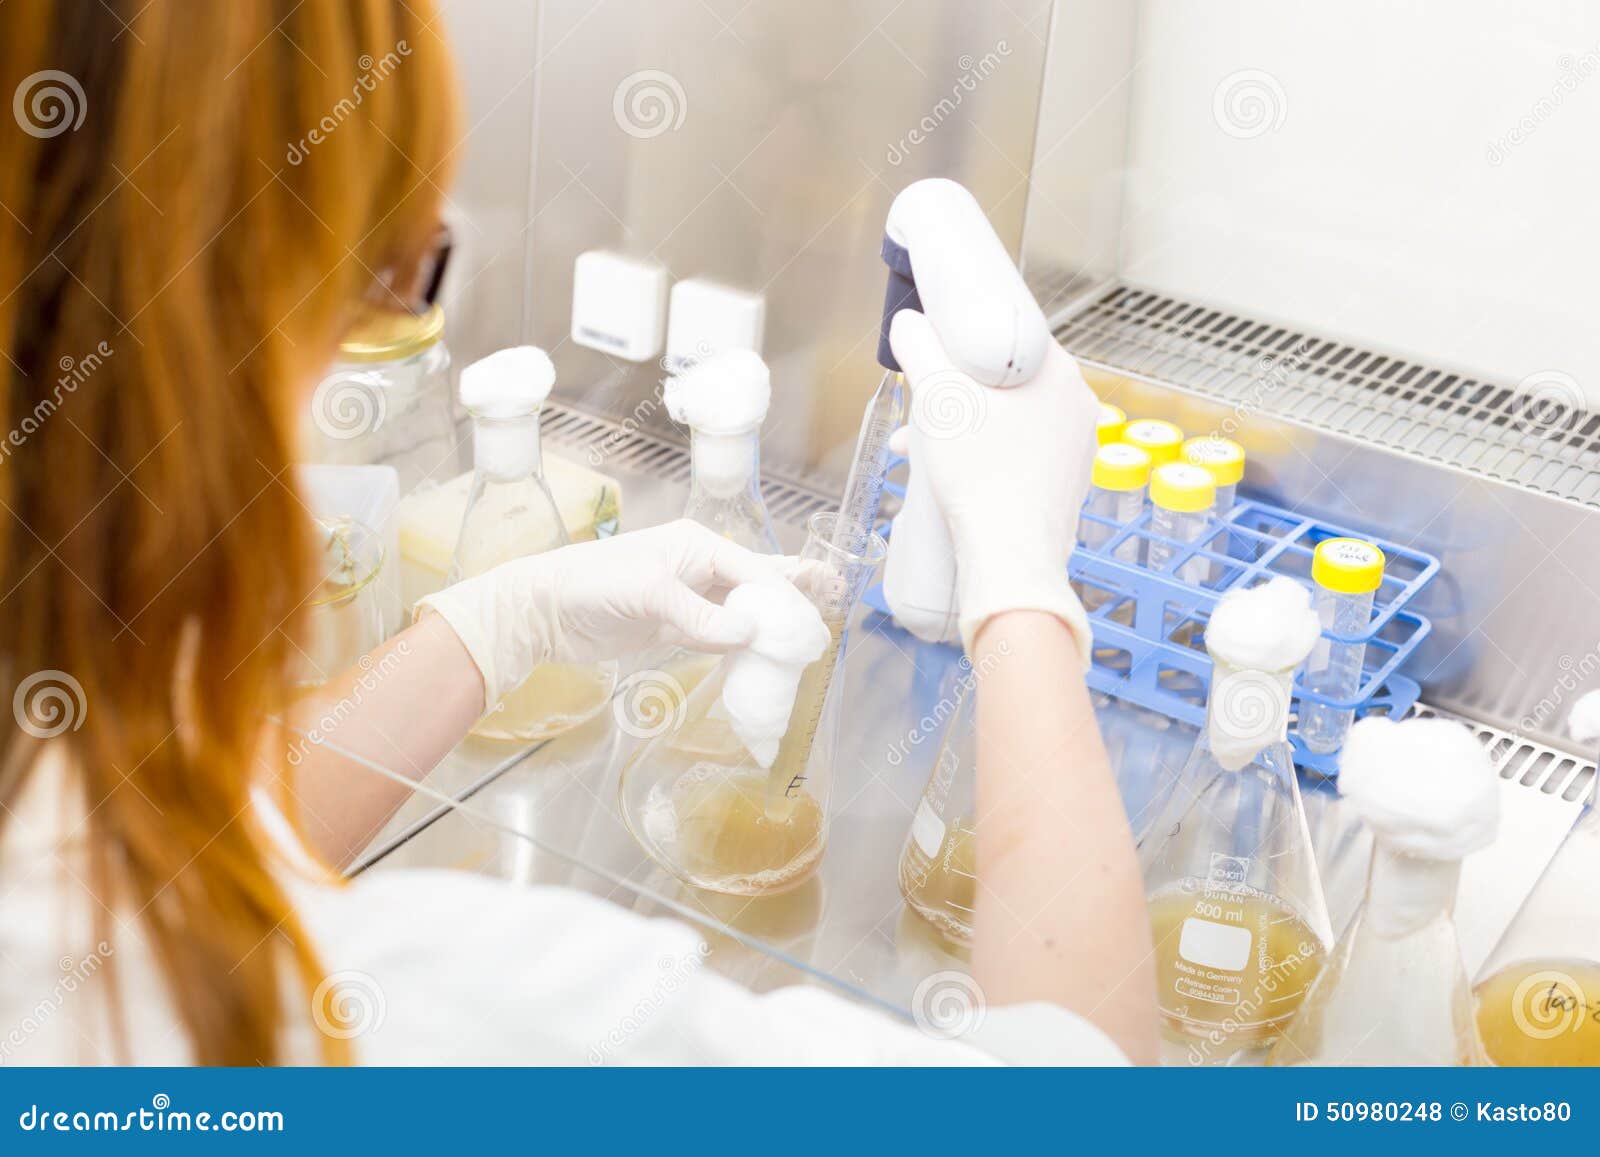 life scientist researching in the laboratory.